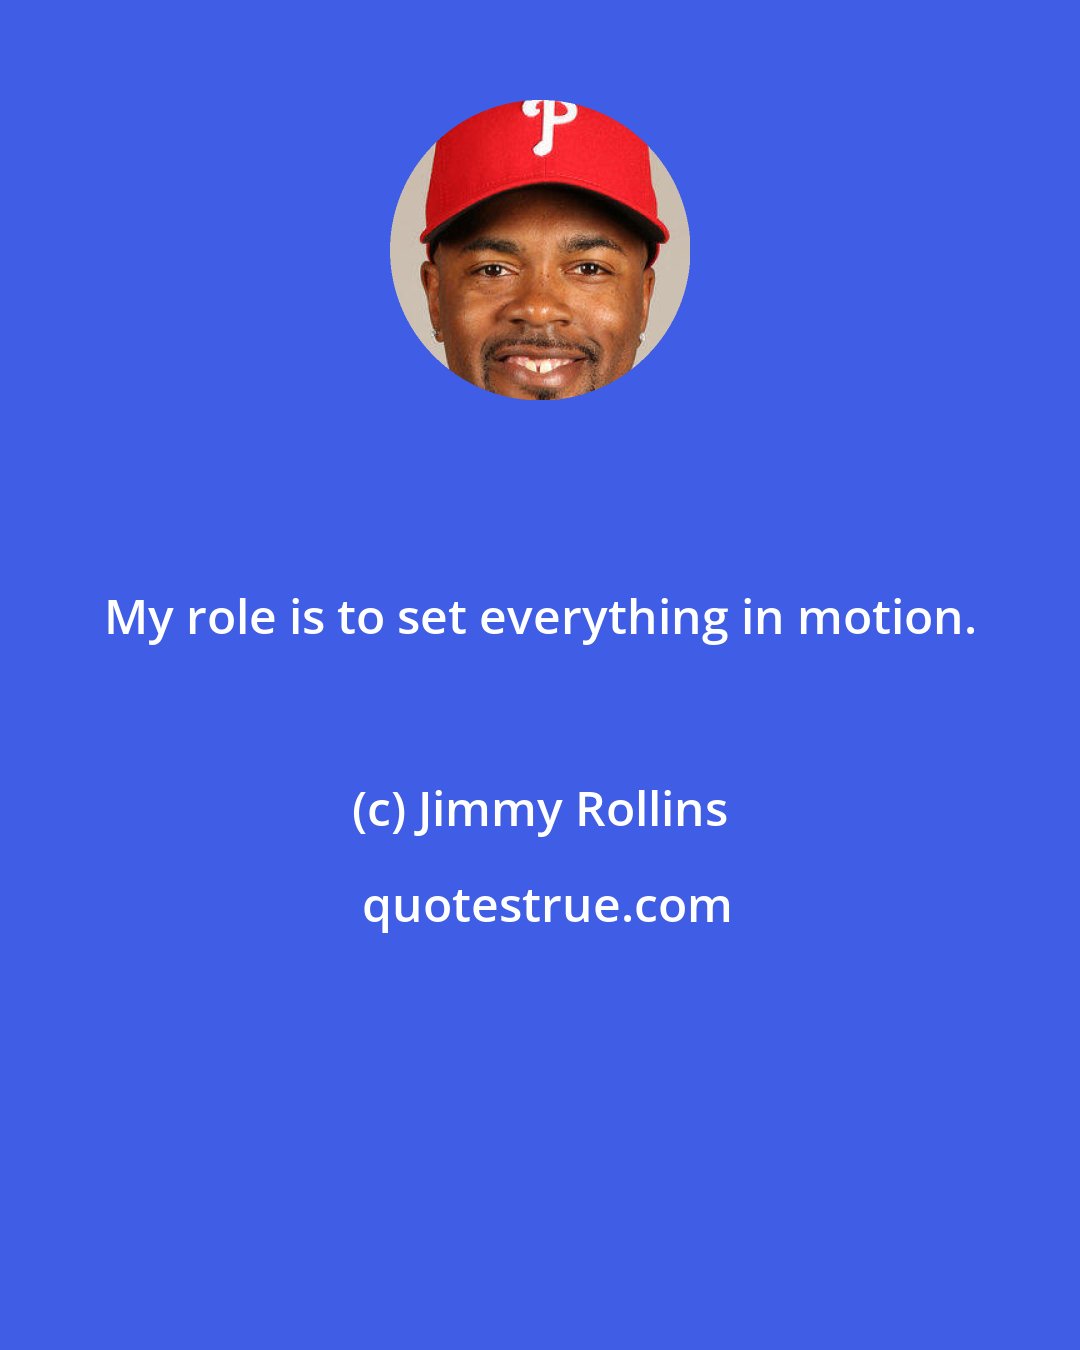 Jimmy Rollins: My role is to set everything in motion.